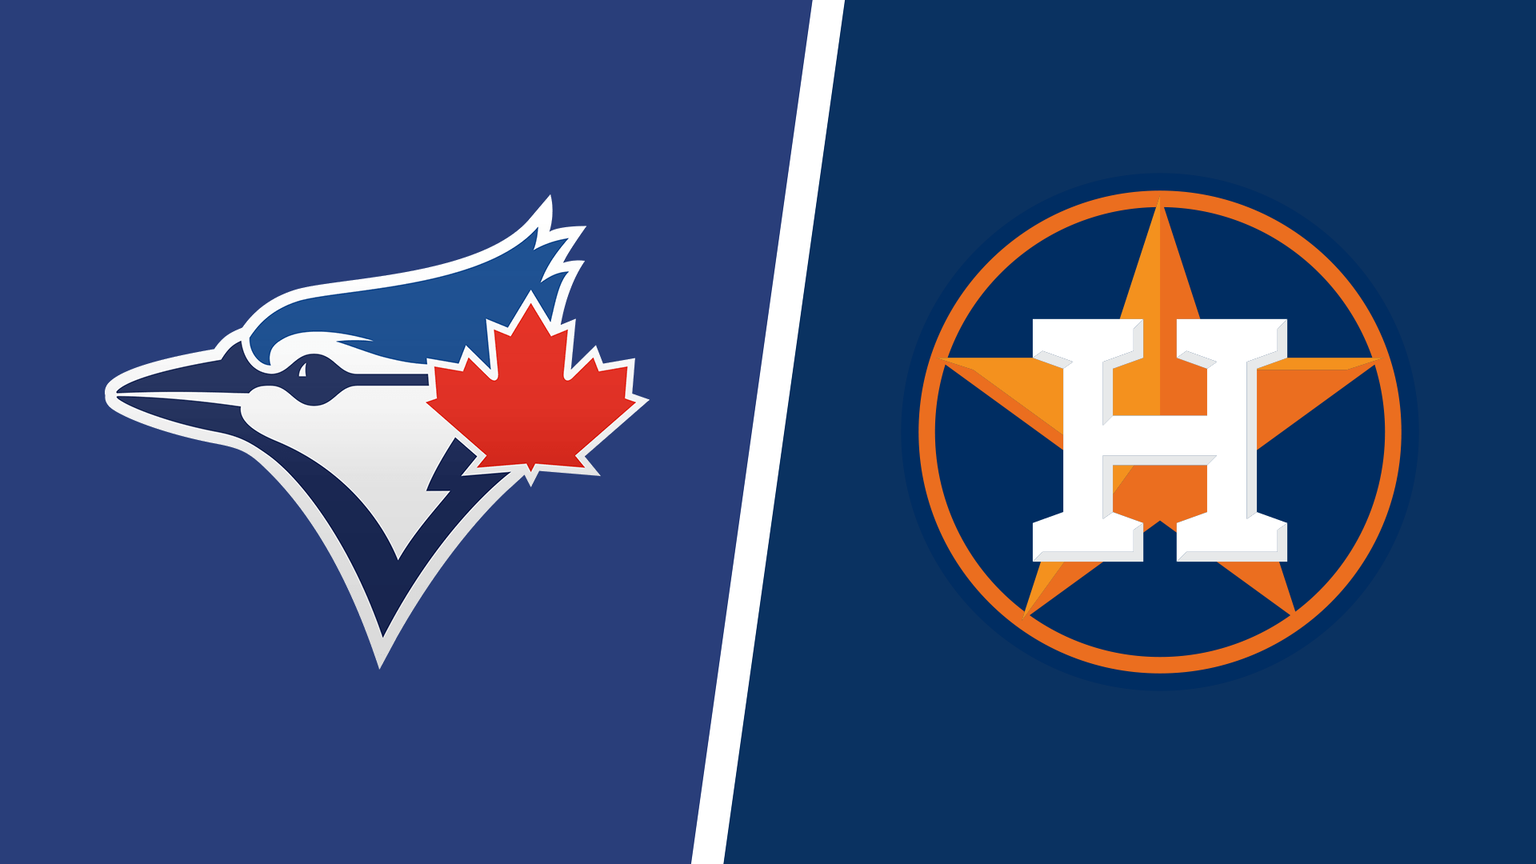 How to Watch Houston Astros vs. Toronto Blue Jays Live Online on June 5